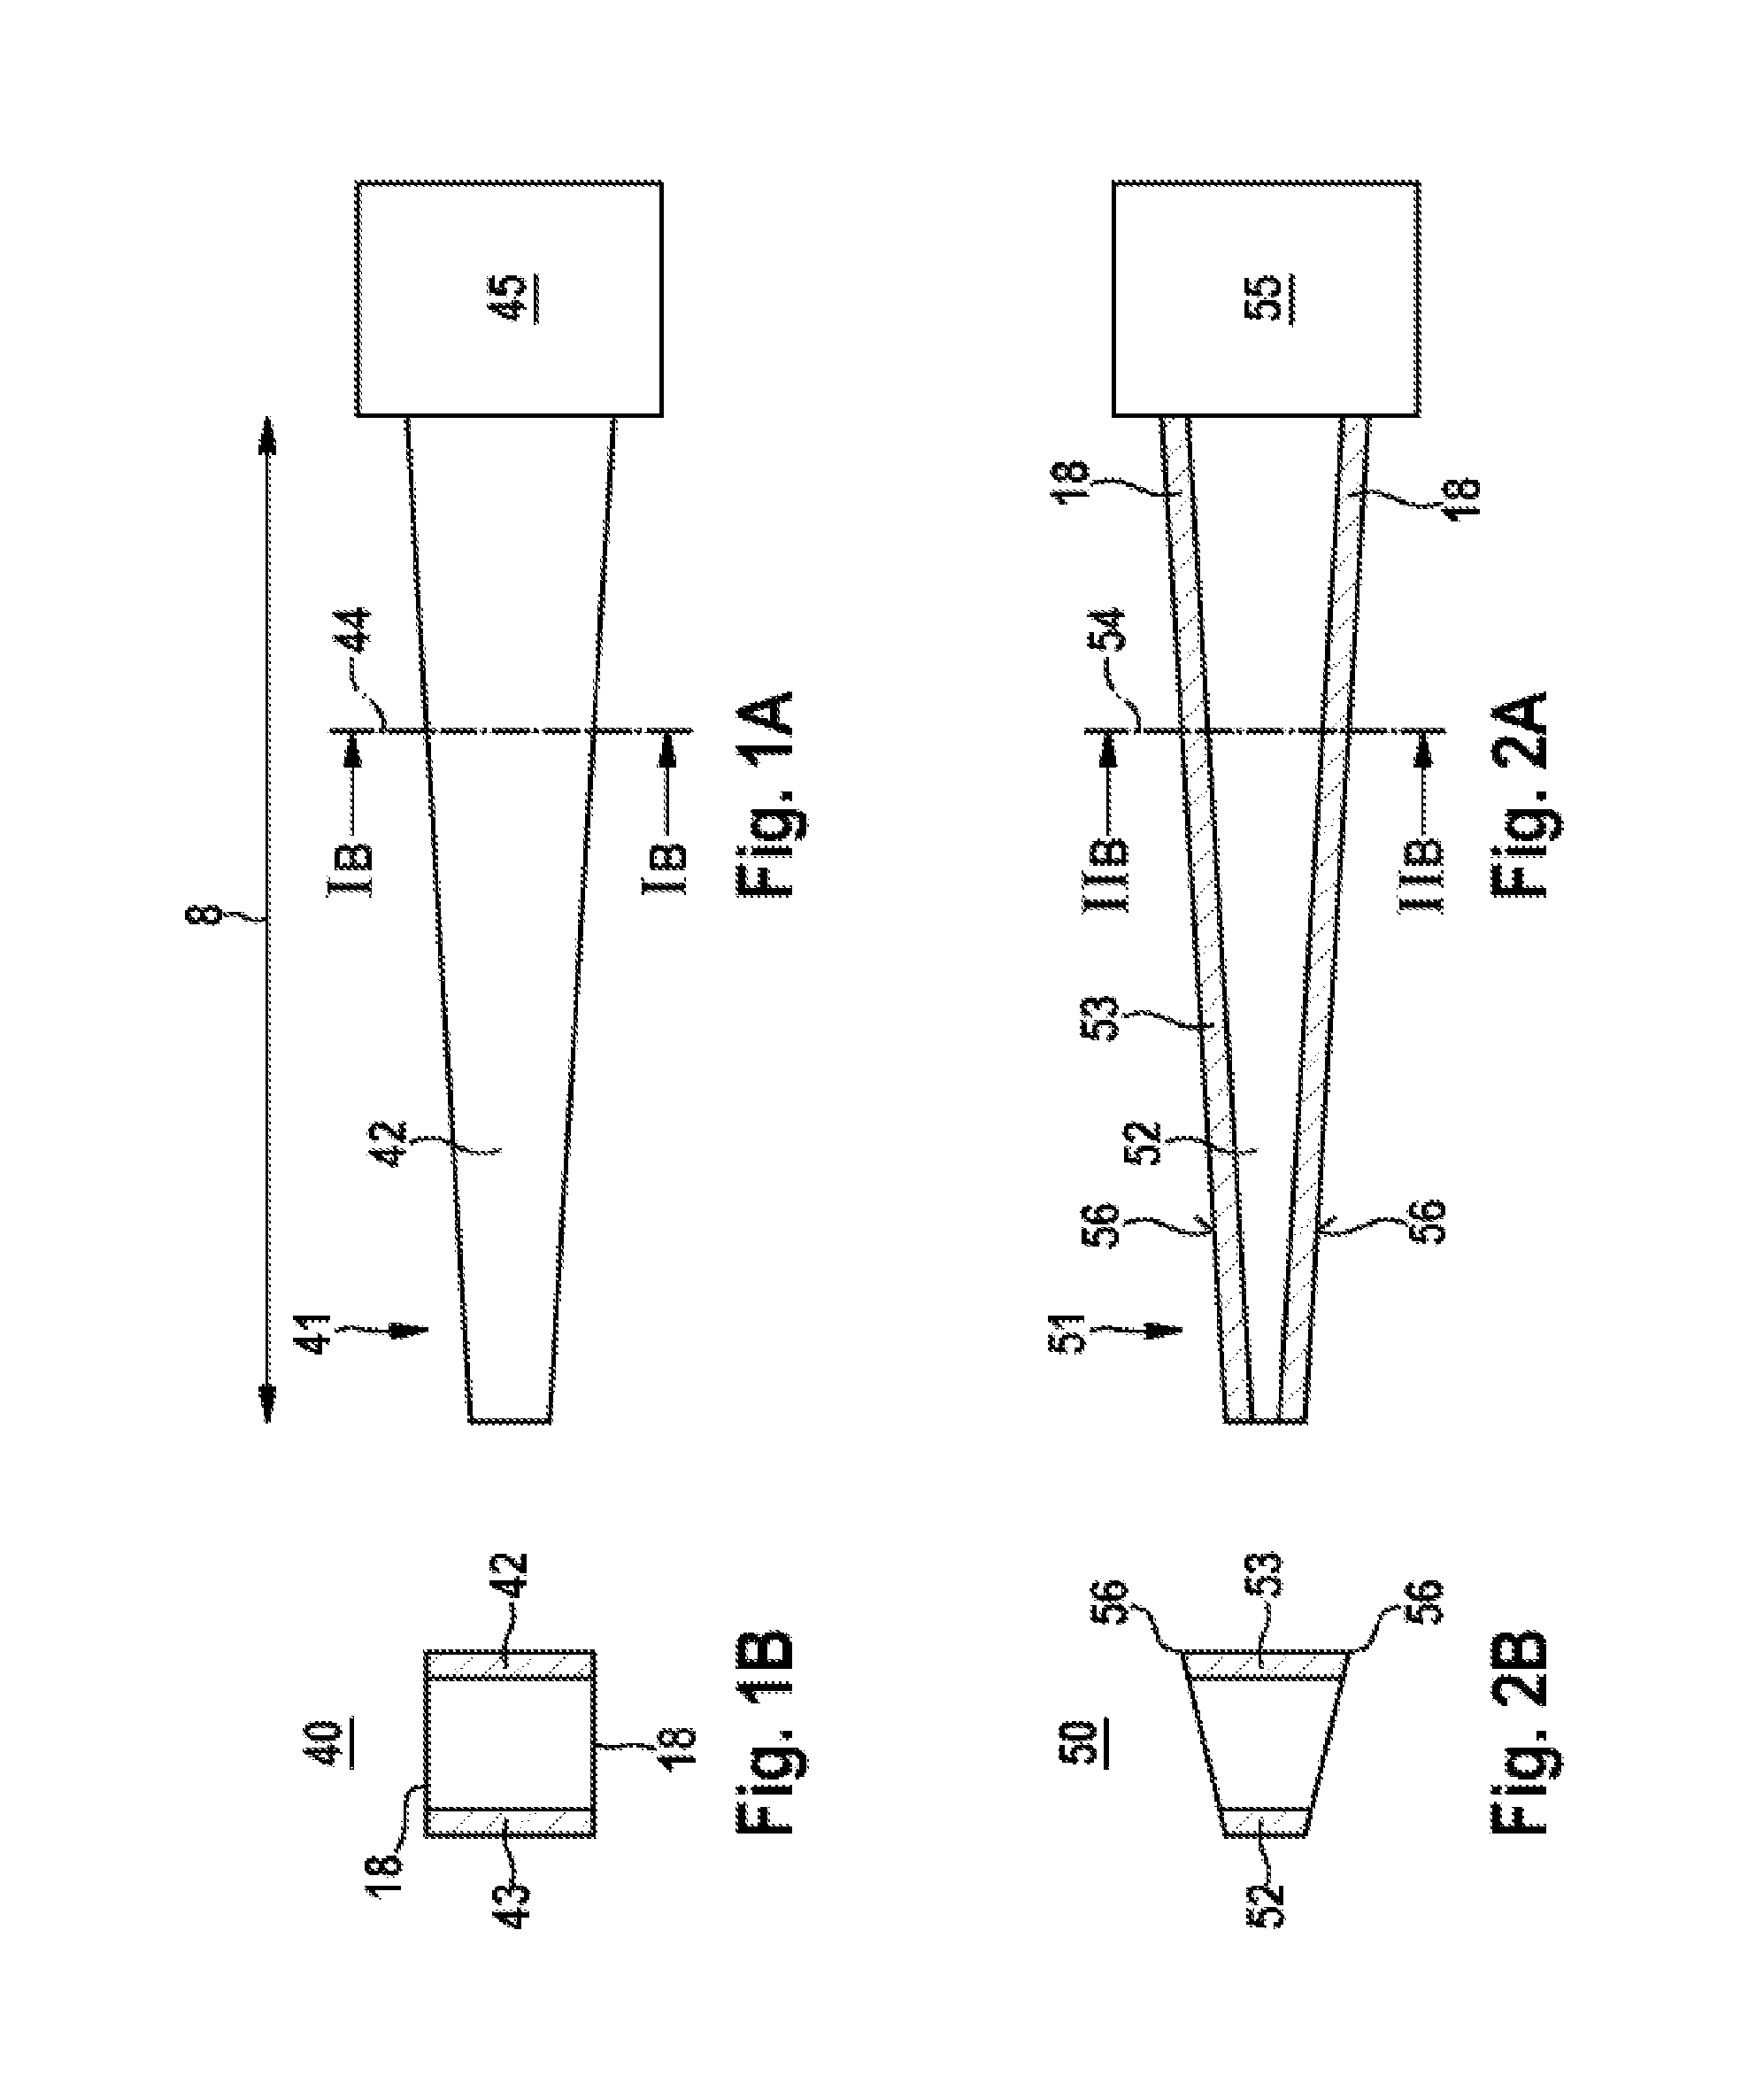 Windshield wiping device for a vehicle